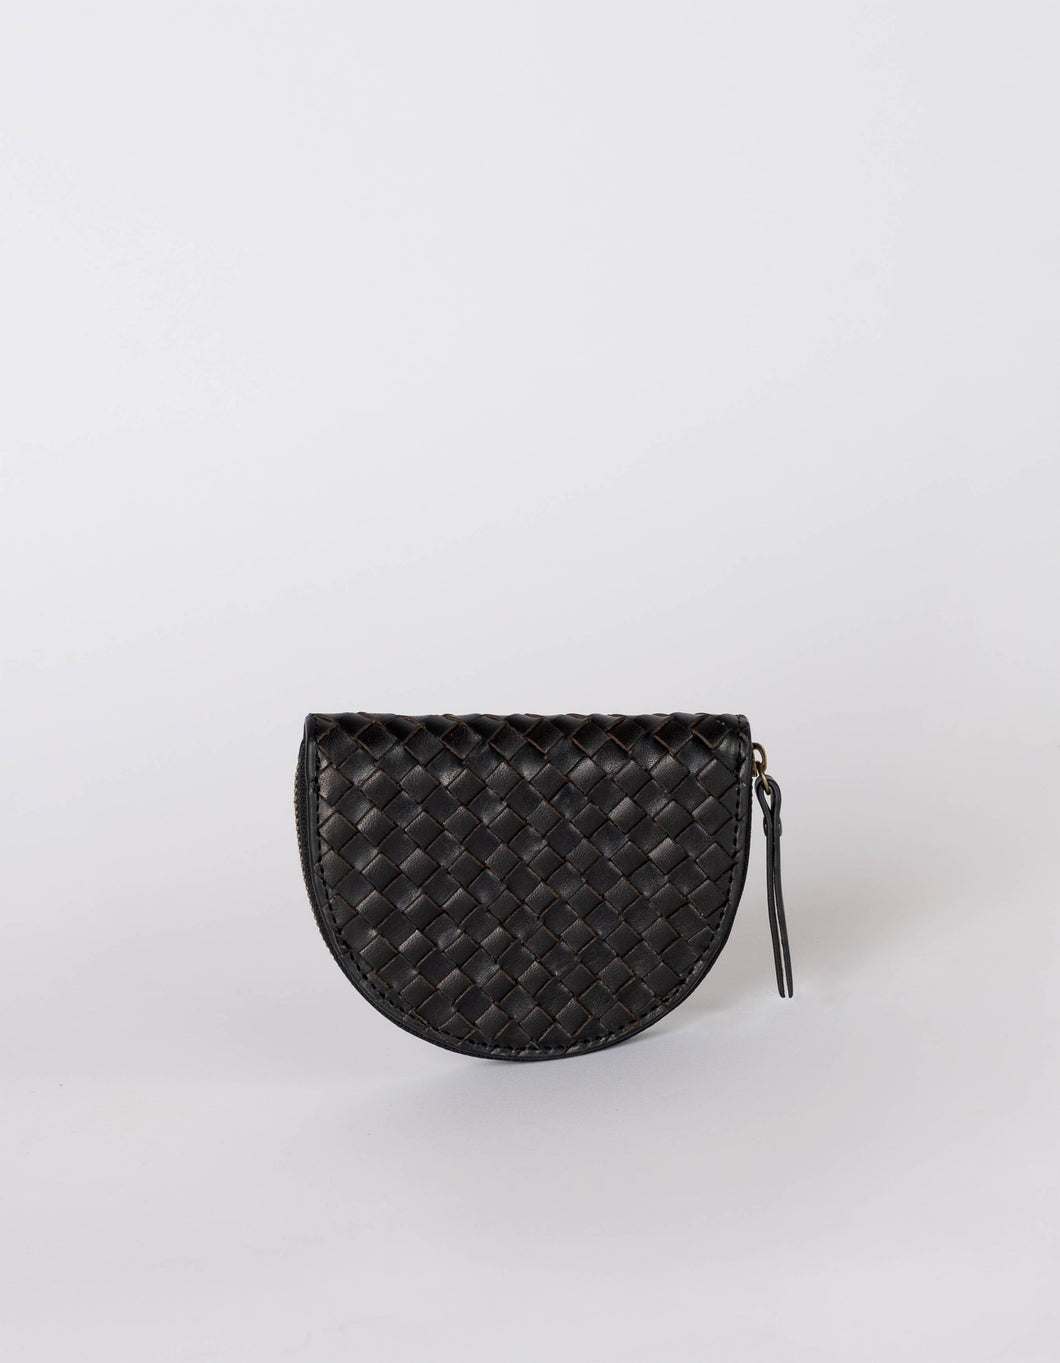 Laura's Purse | Black Woven Leather